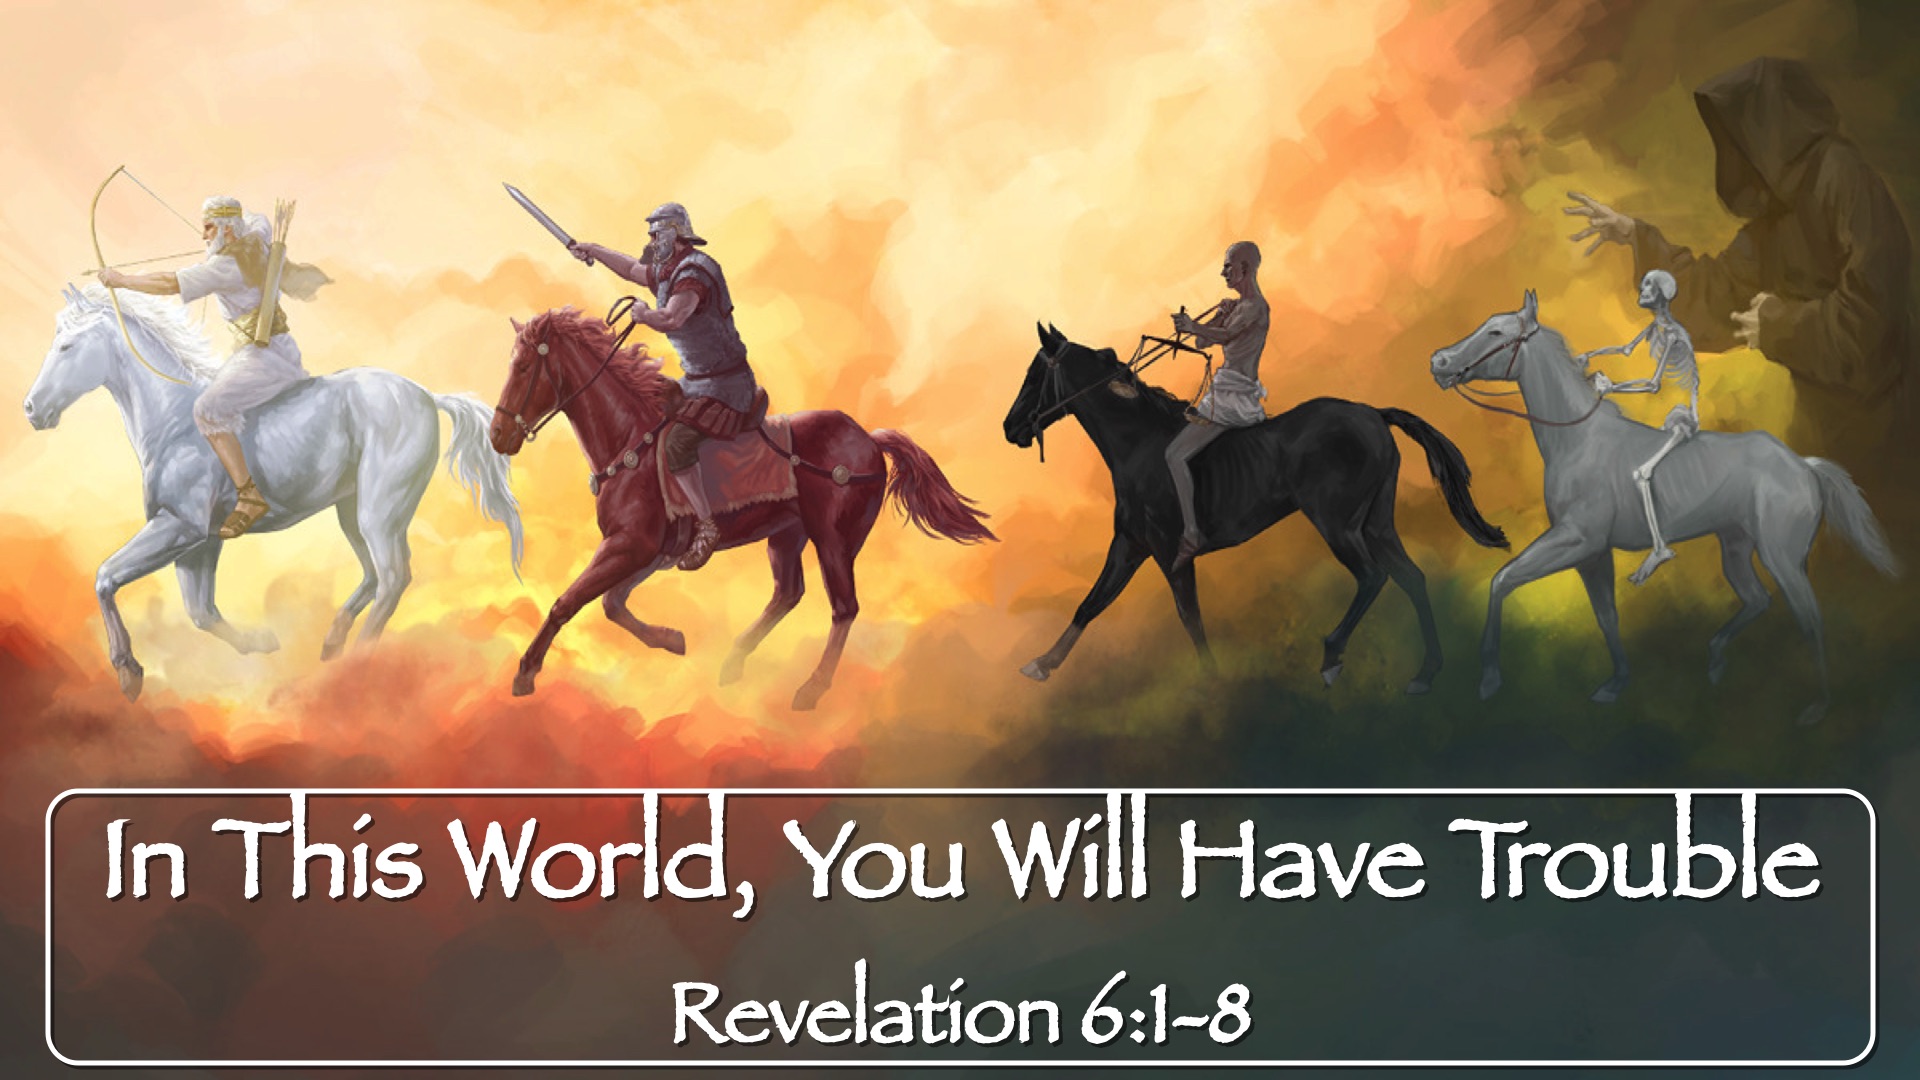 “The Book of Revelation: In This World, You Will Have Trouble”